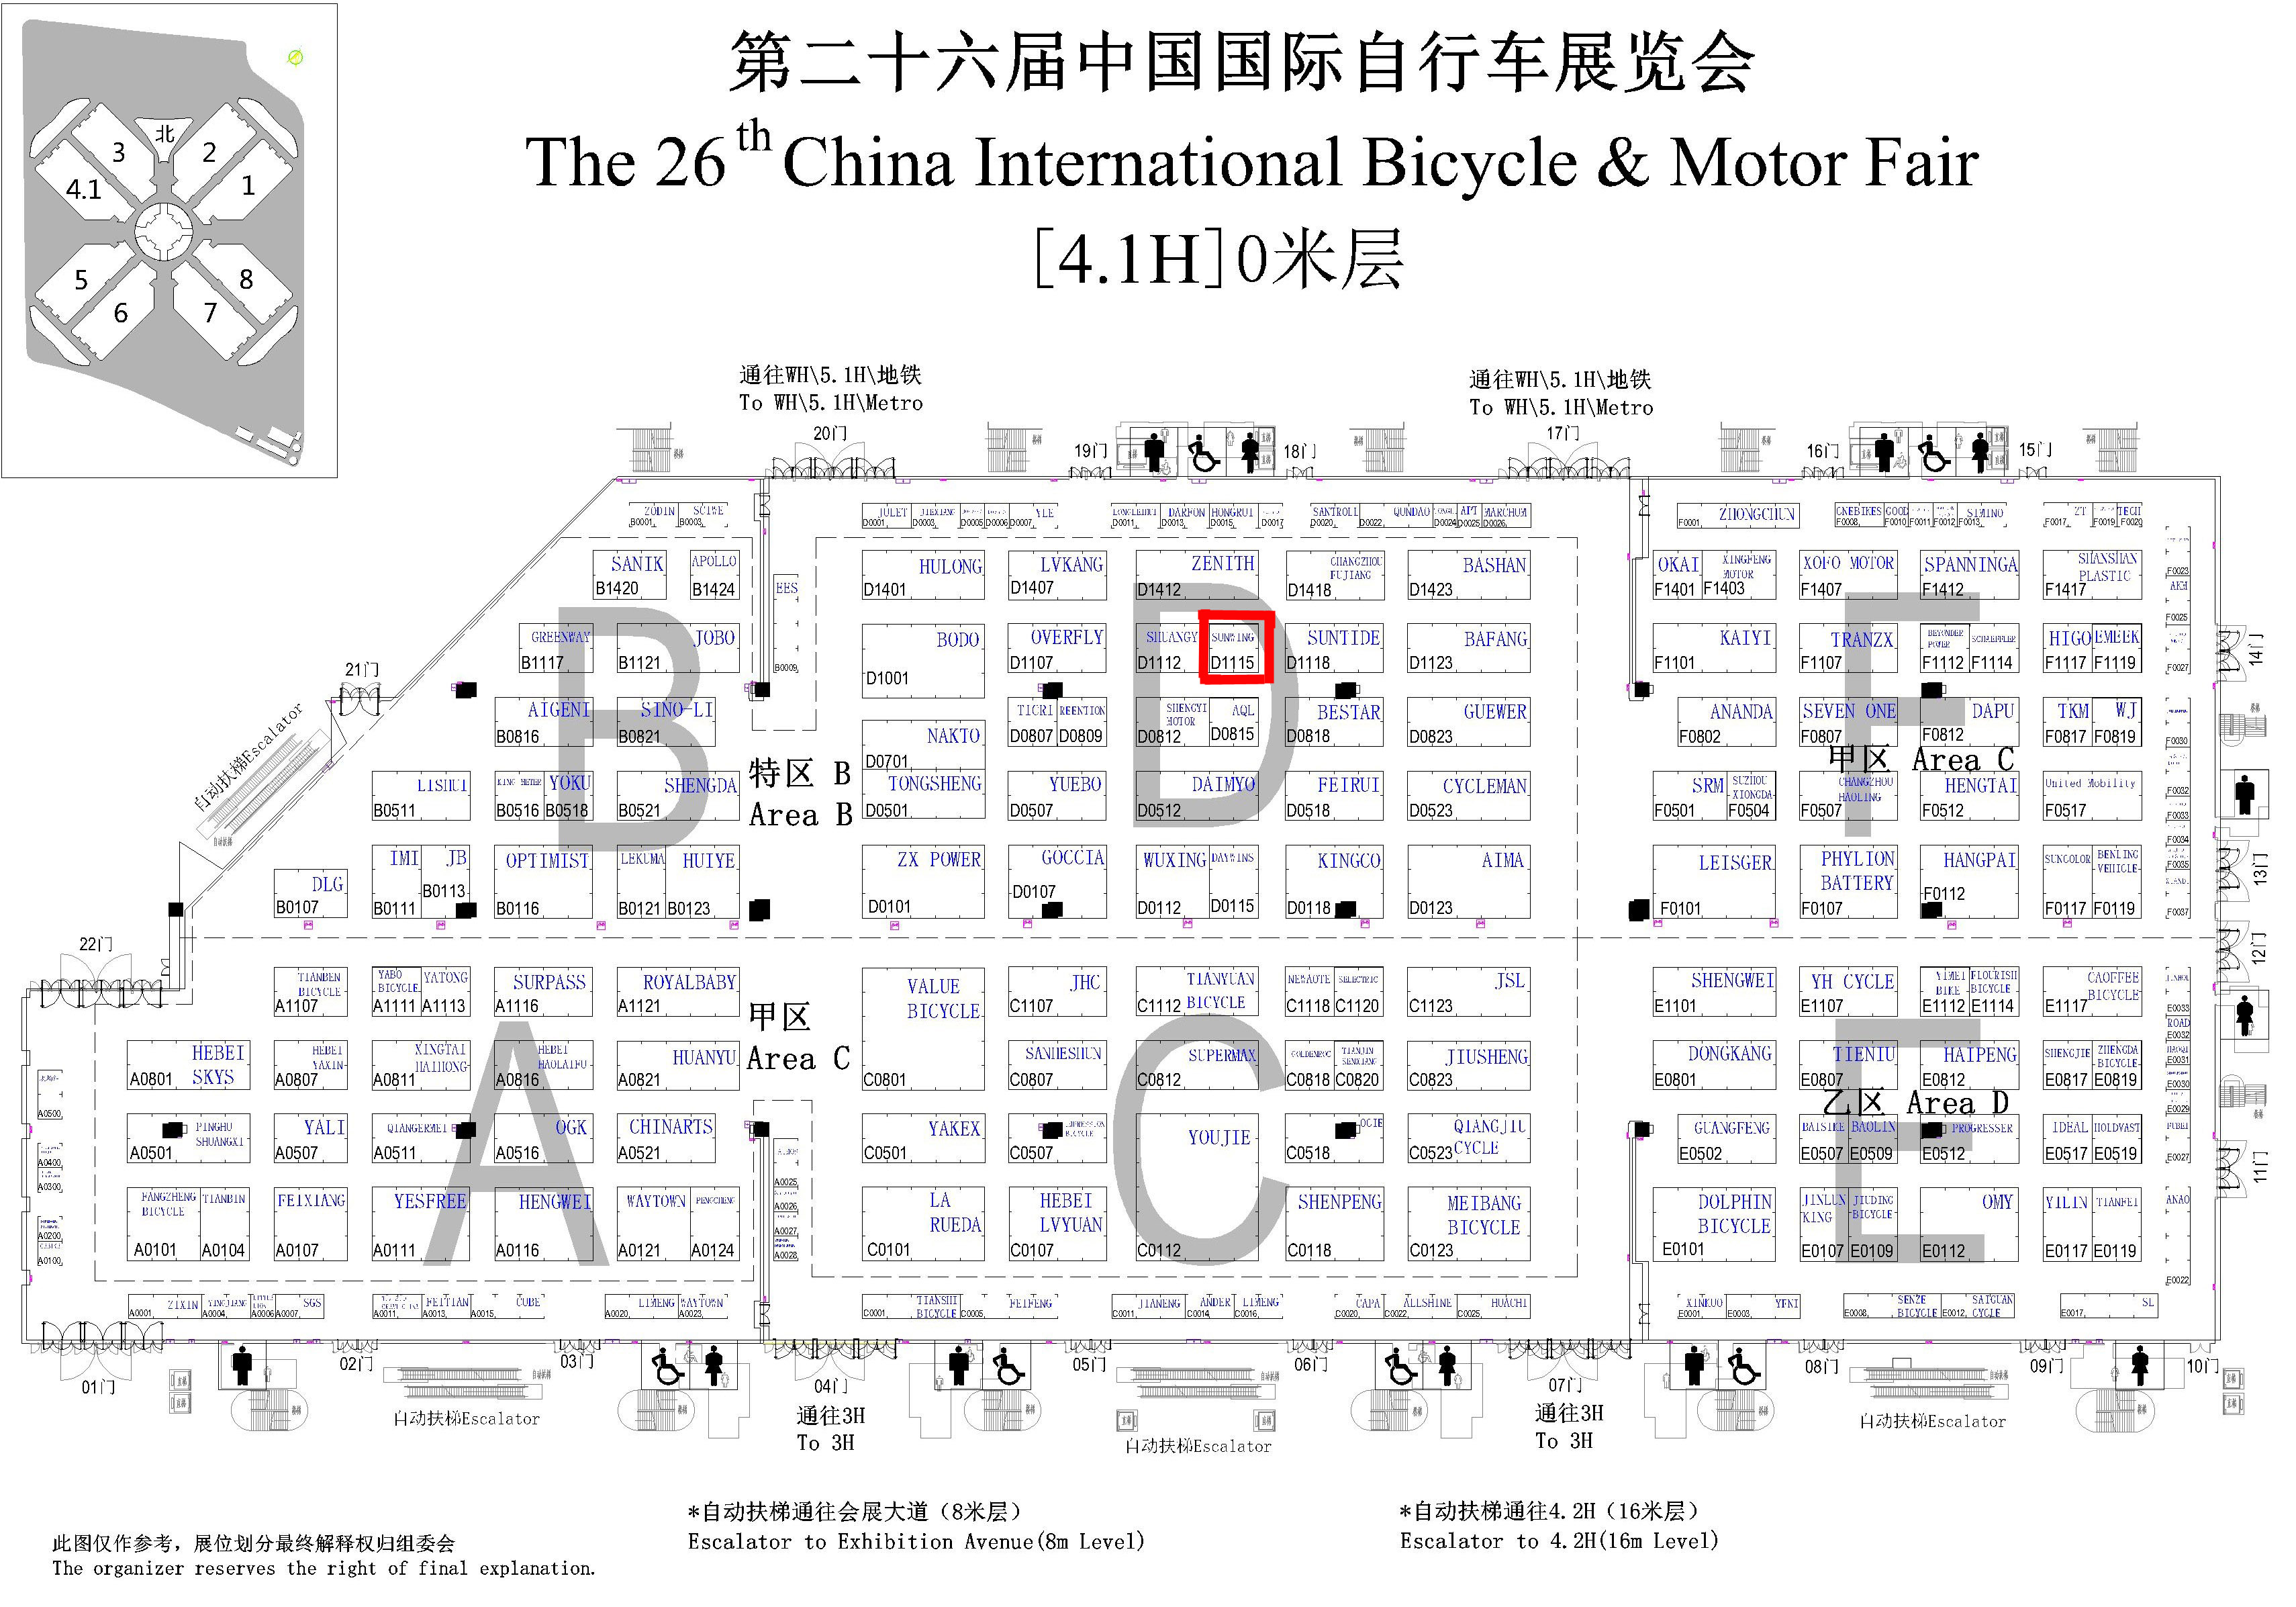 Booth_Number_4.1_D1115.jpg